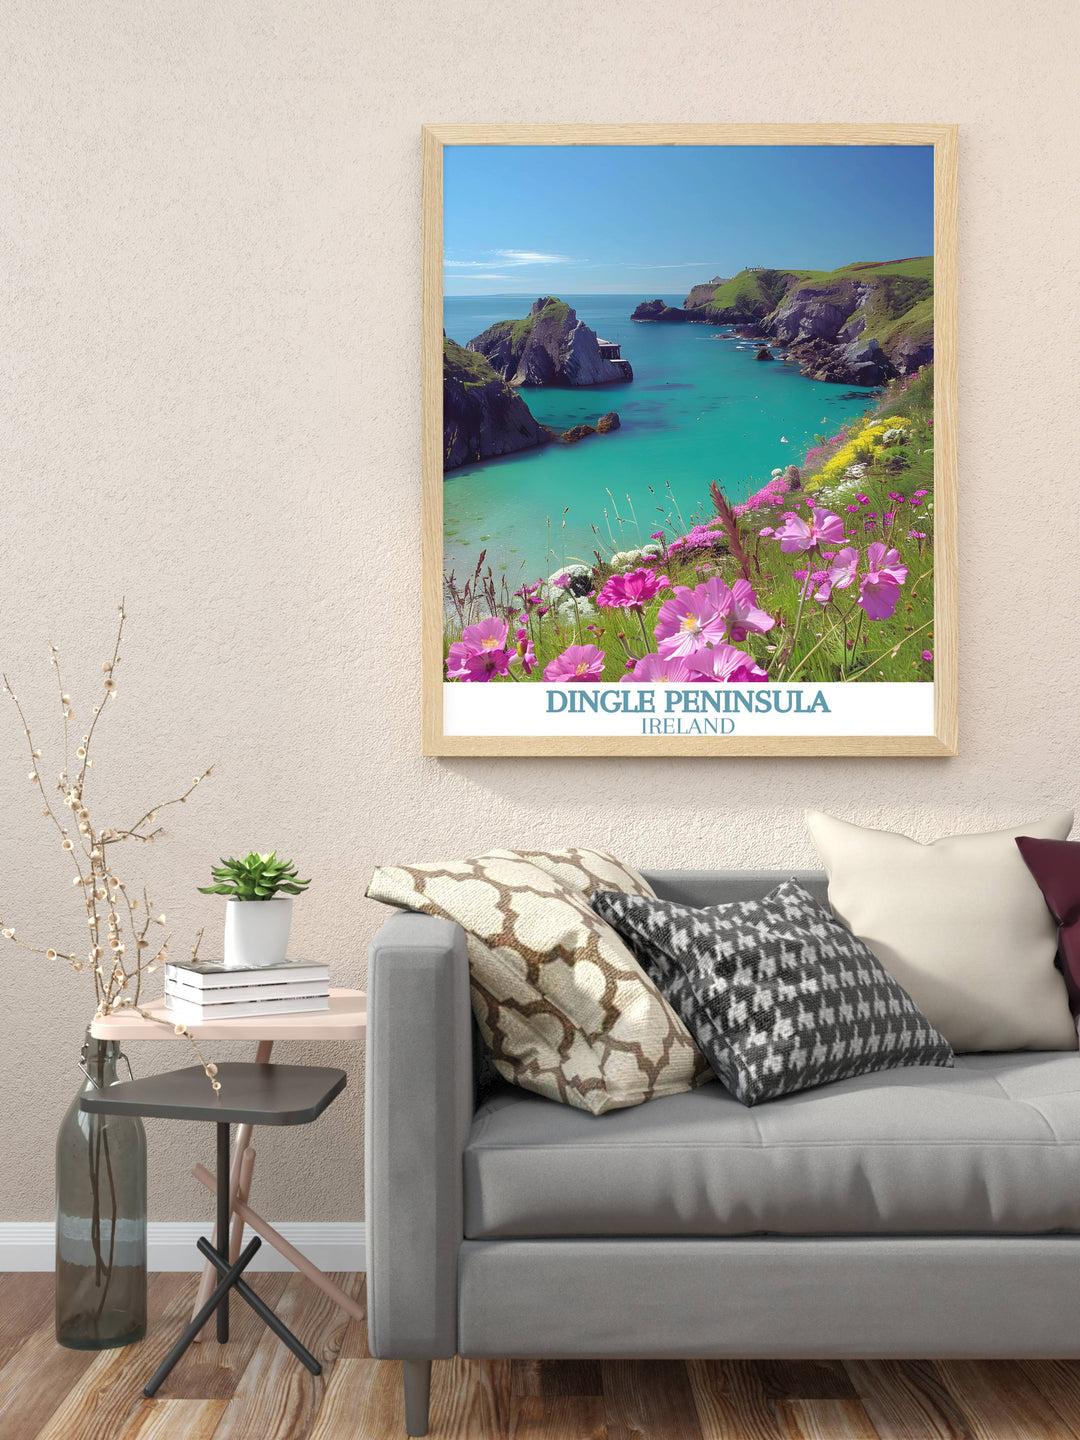 High quality print of Dunquin Pier, showcasing the natural contrast between the emerald Irish grass and the deep blue sea.